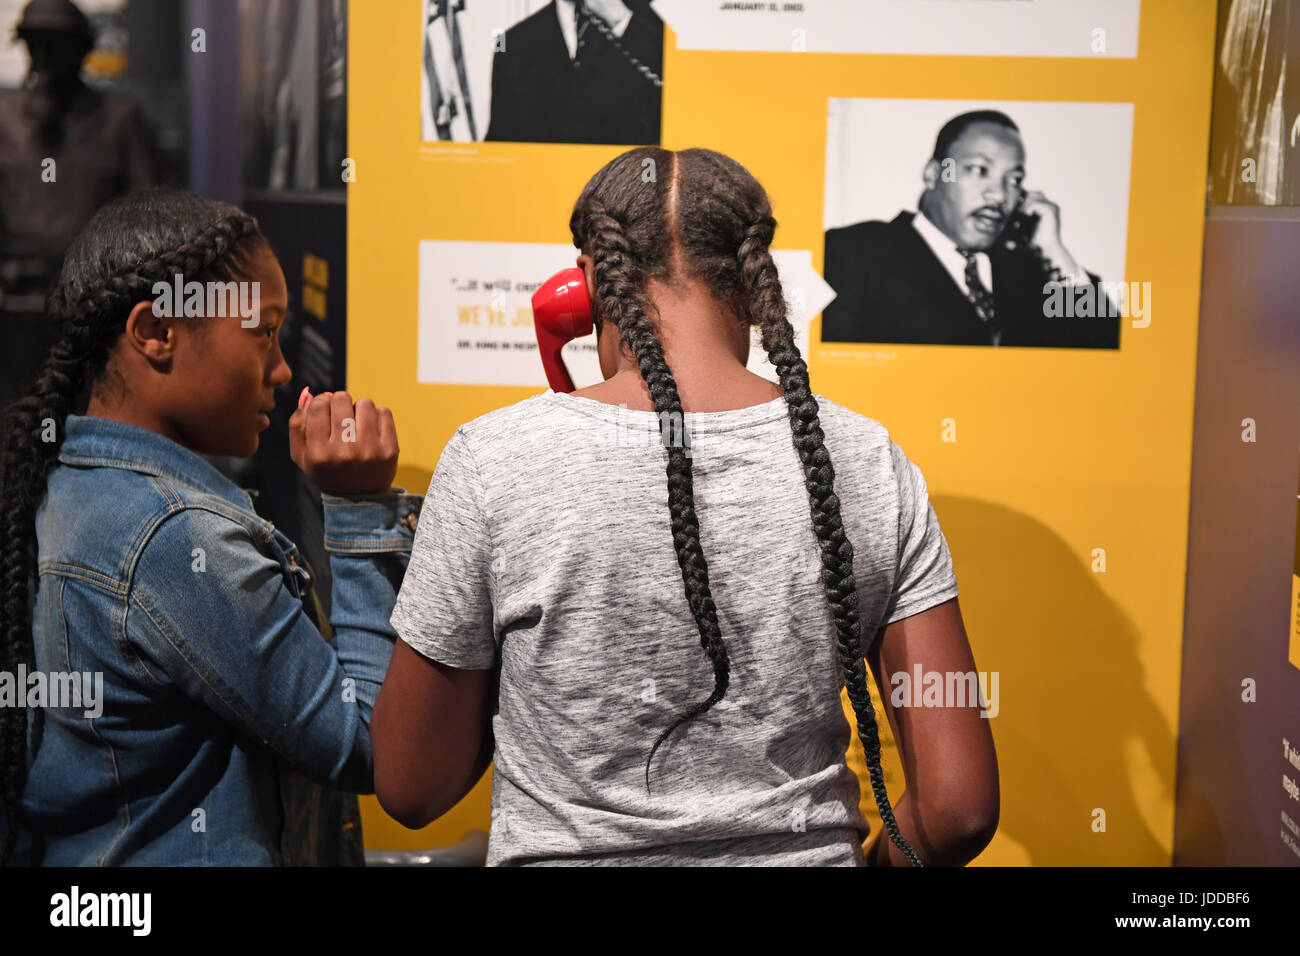 Memphis, TN, USA - June 9, 2017: Young girls inside the National Civil Rights Museum and the site of the Assassination of Dr. Martin Luther King Jr. Stock Photo